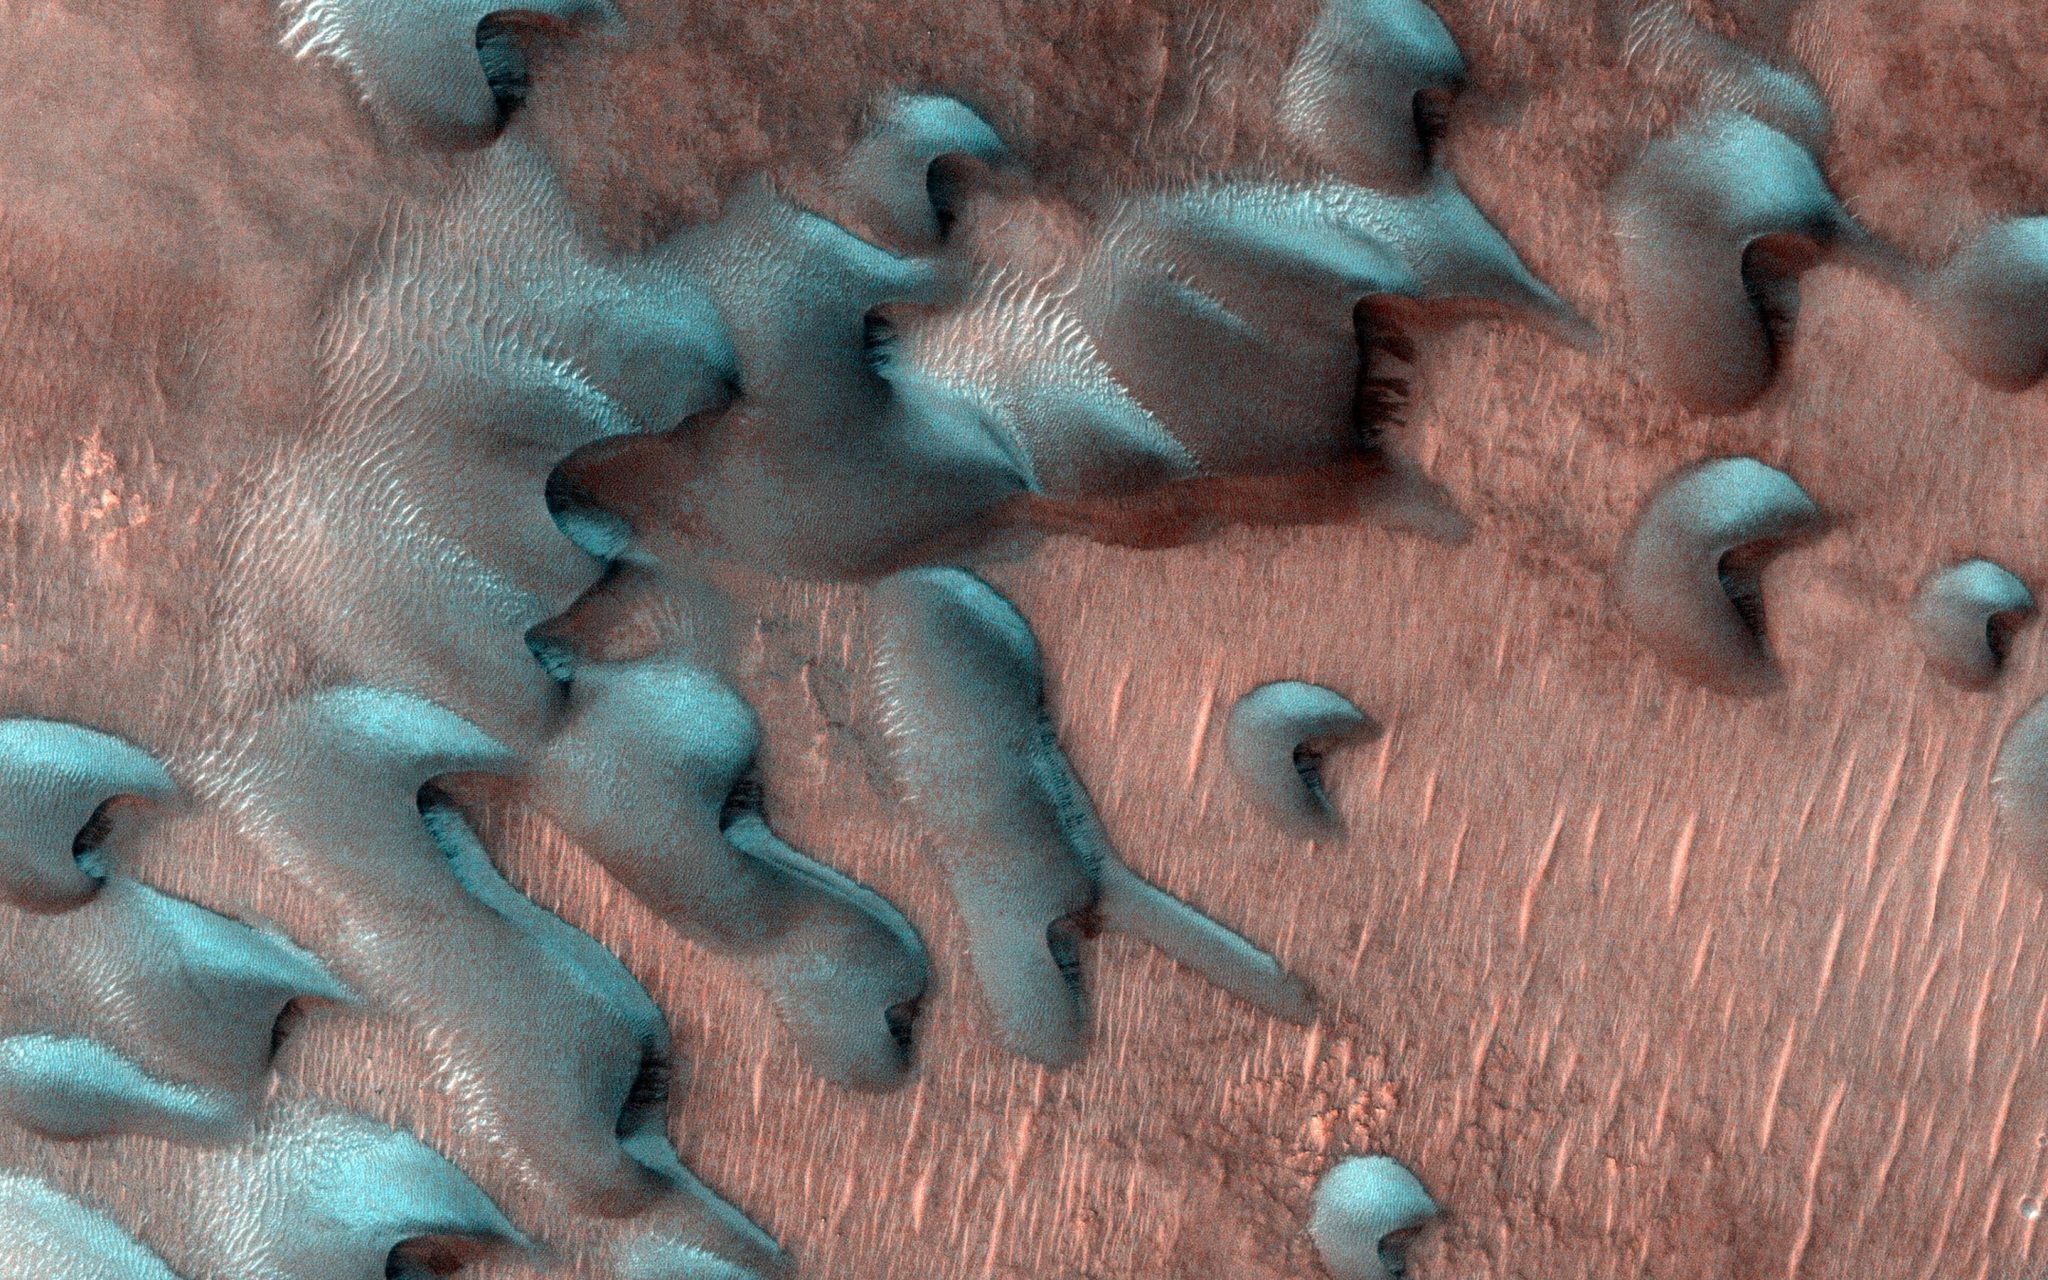 NASA Explores Martian Winter Wonderland – Otherworldly Vacation Scene With Dice-Formed Snow